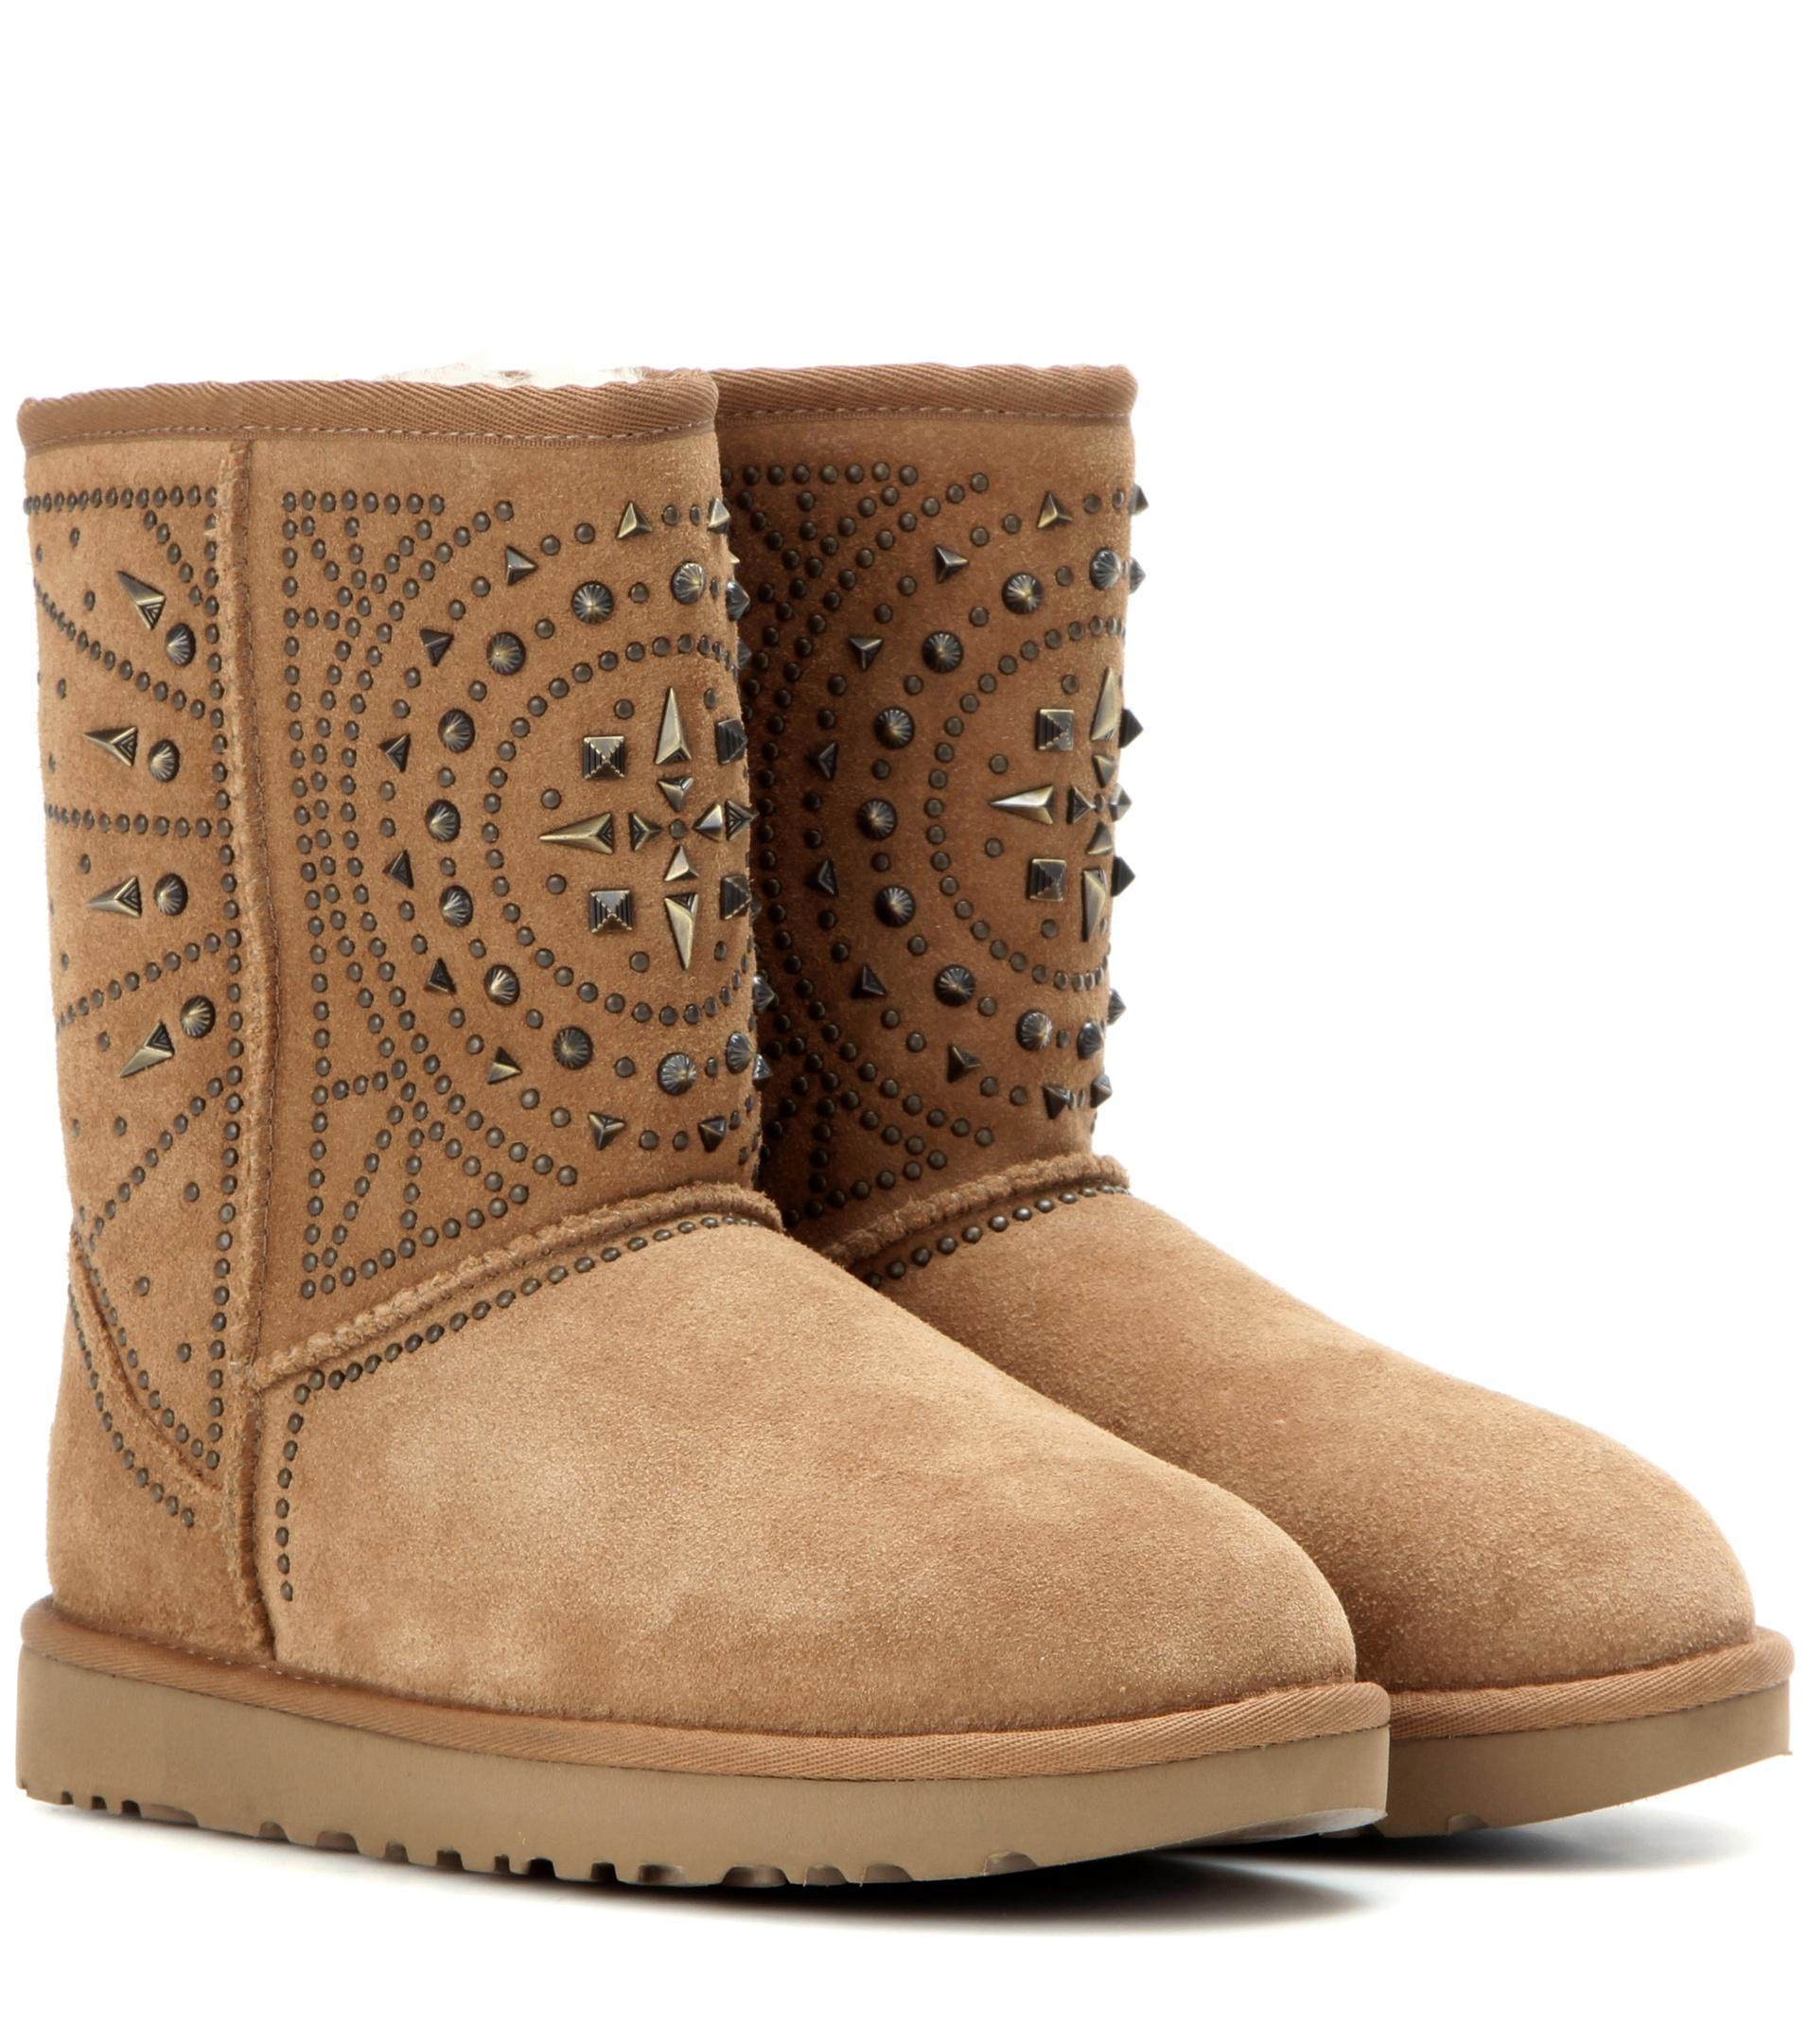 ugg boots with studs